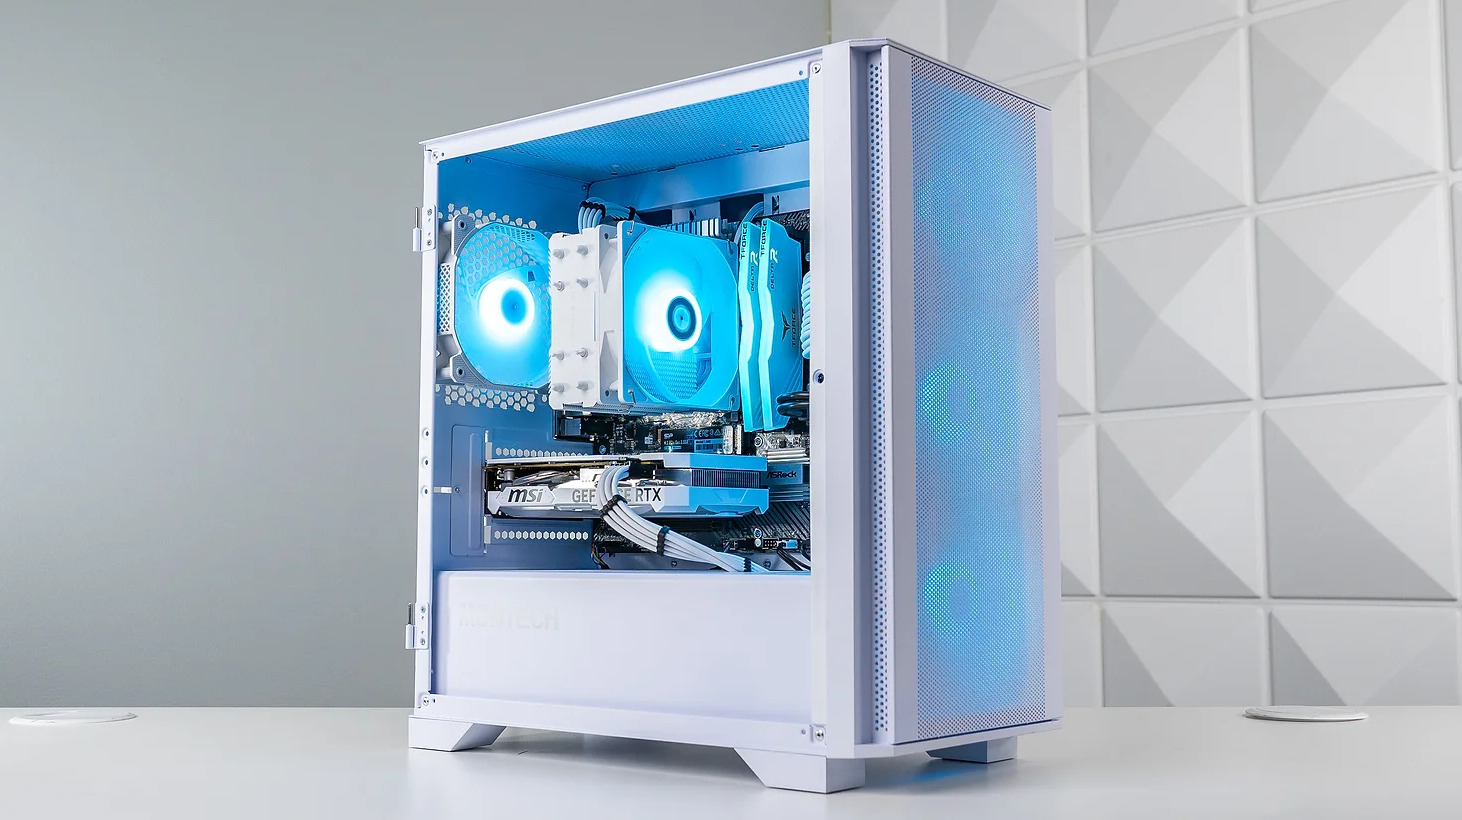 Custom PC Build | I will build a PC for you based on your preferences